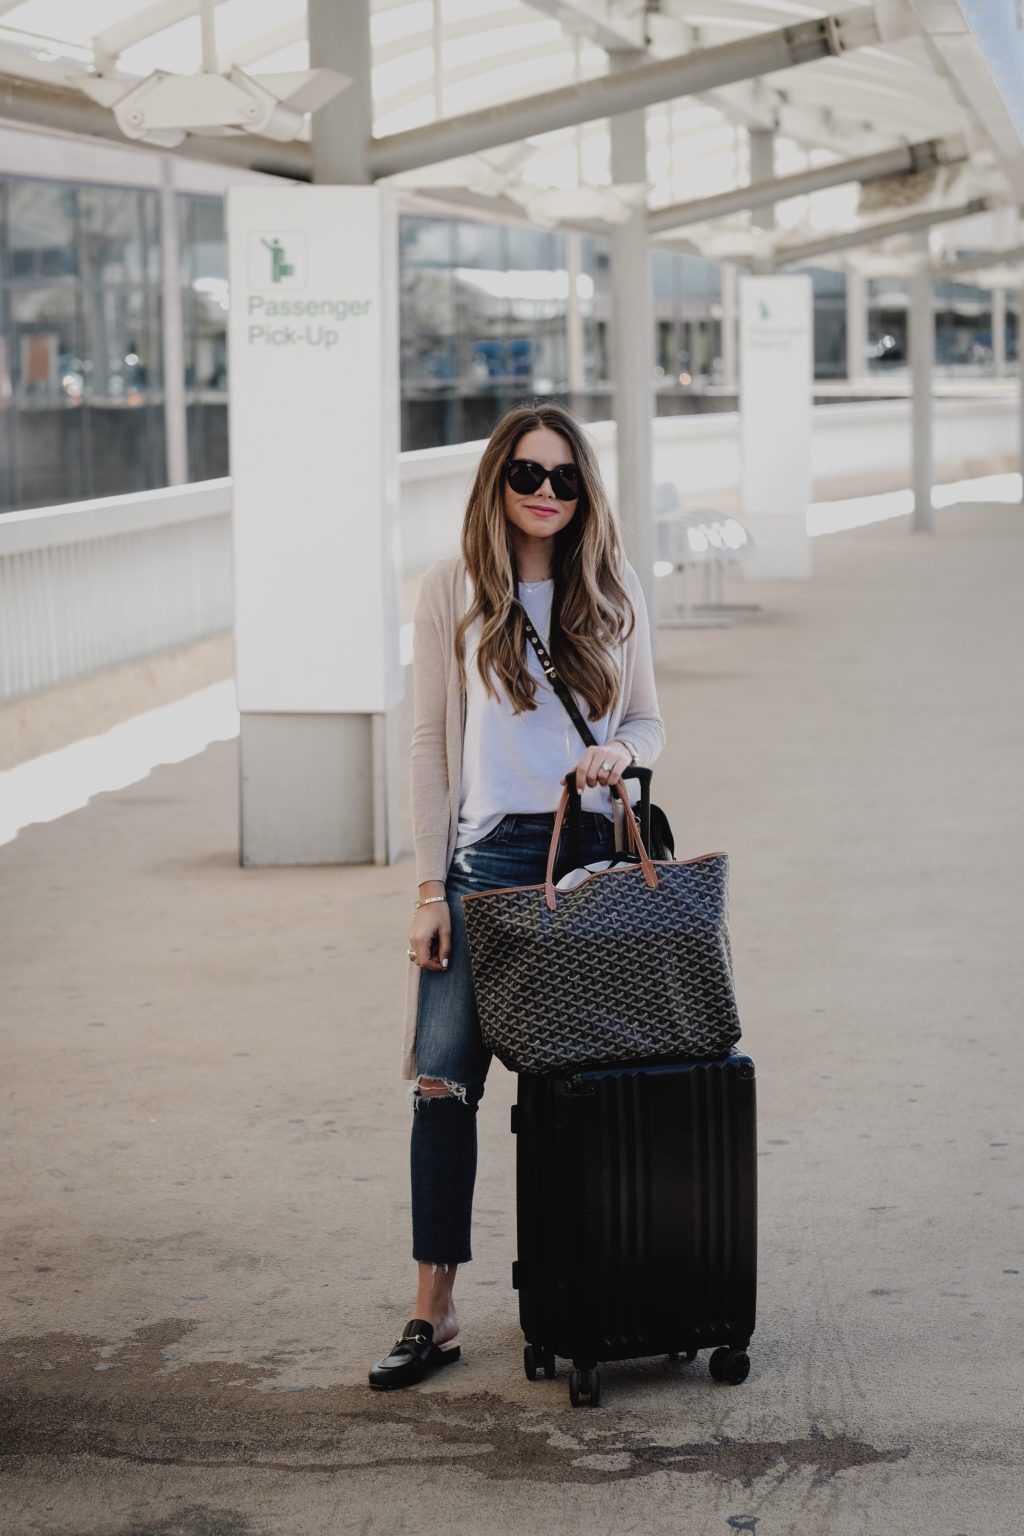 Travel Outfits: Traveling Outfit Ideas for Women